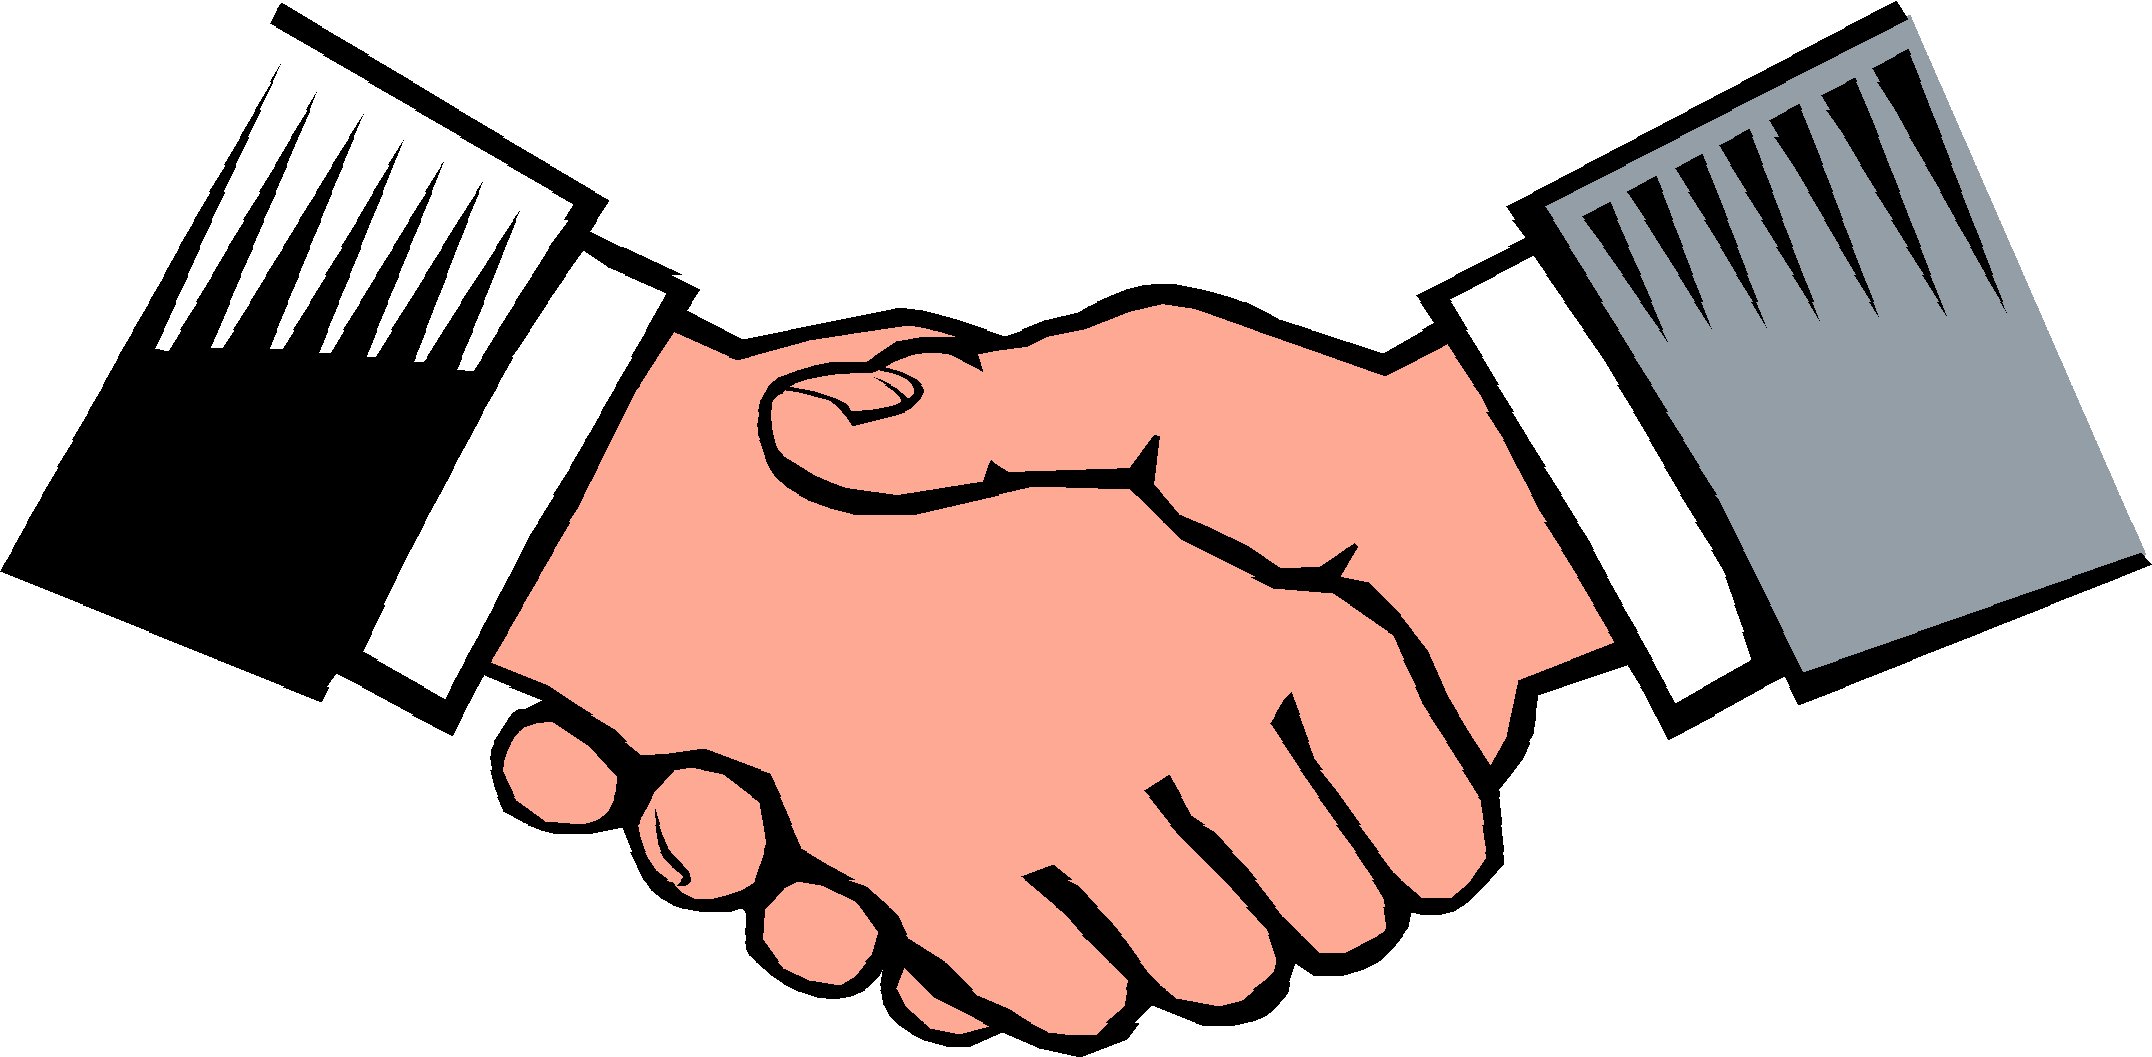 Shaking Hands Clip Art Free - Cliparts.co